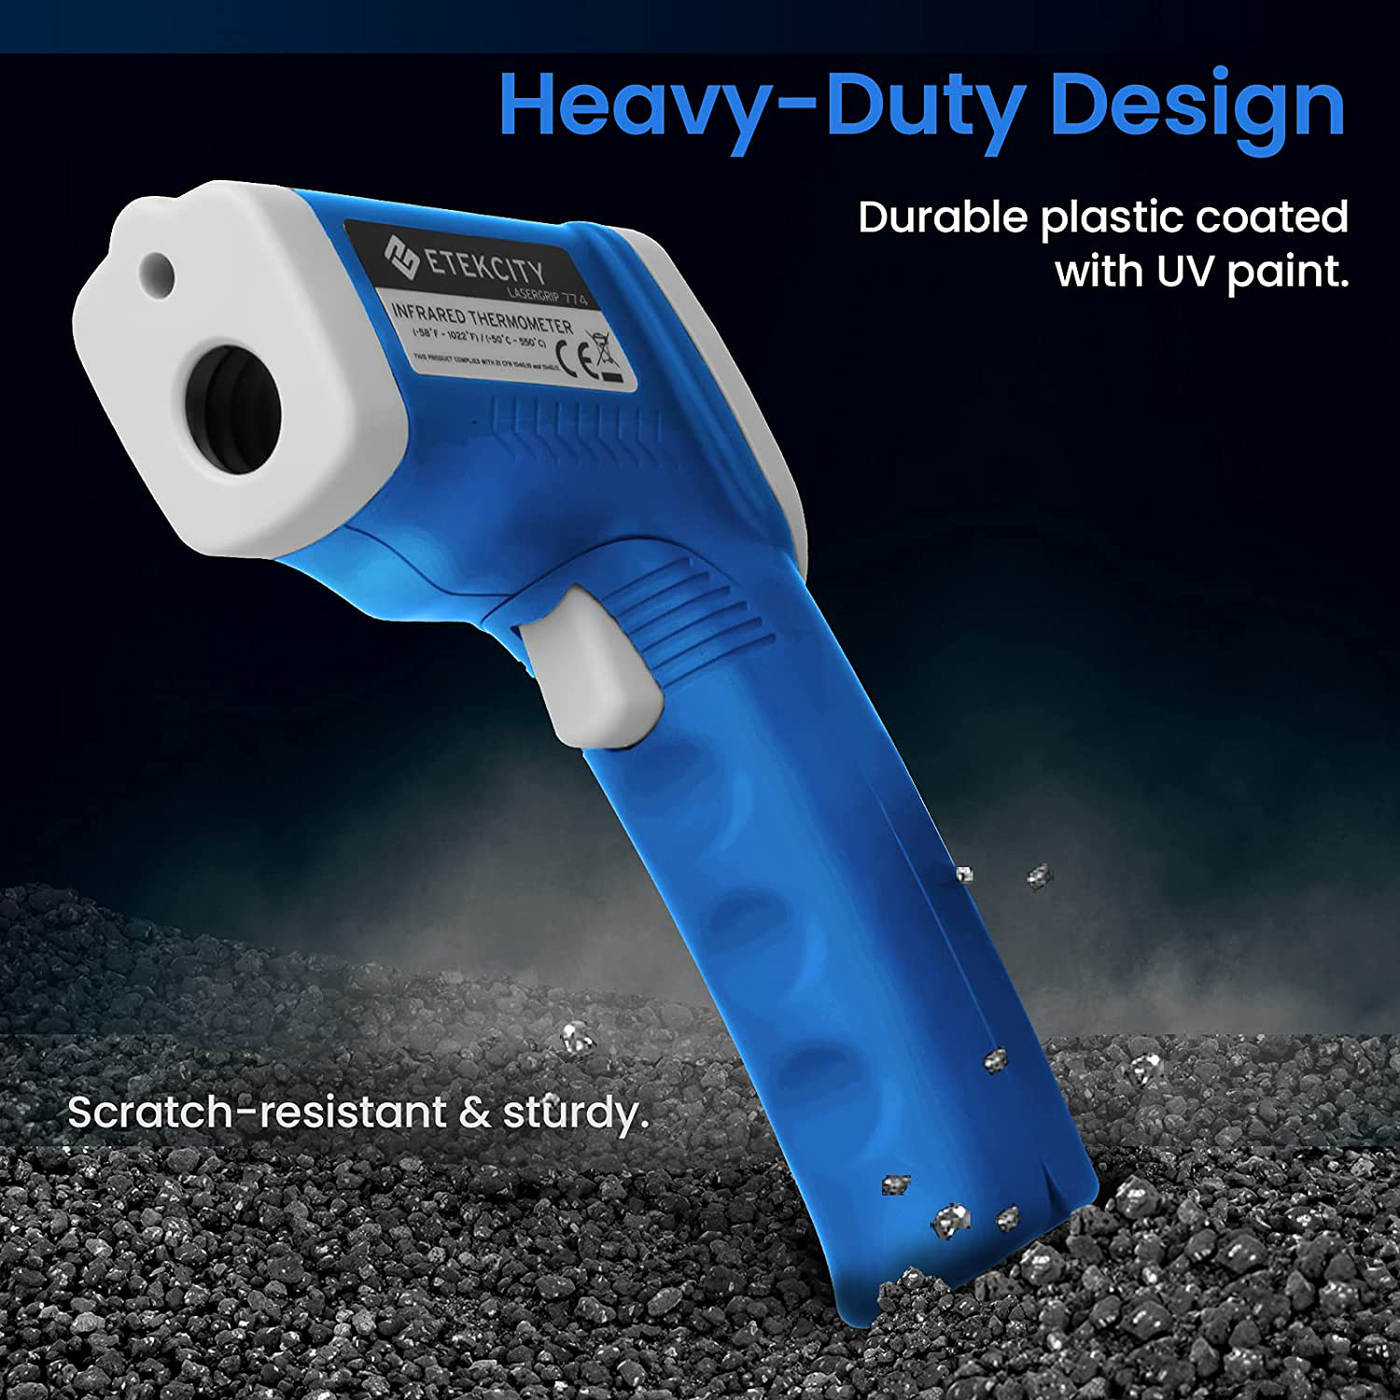 Etekcity Infrared Thermometer Upgrade 774 (Not for Human) Temperature Gun Non-Contact Digital Lasergrip -58℉~ 716℉ (-50℃ ~ 380℃)with Adjustable Emissivity & Max Measure, Orange and Black